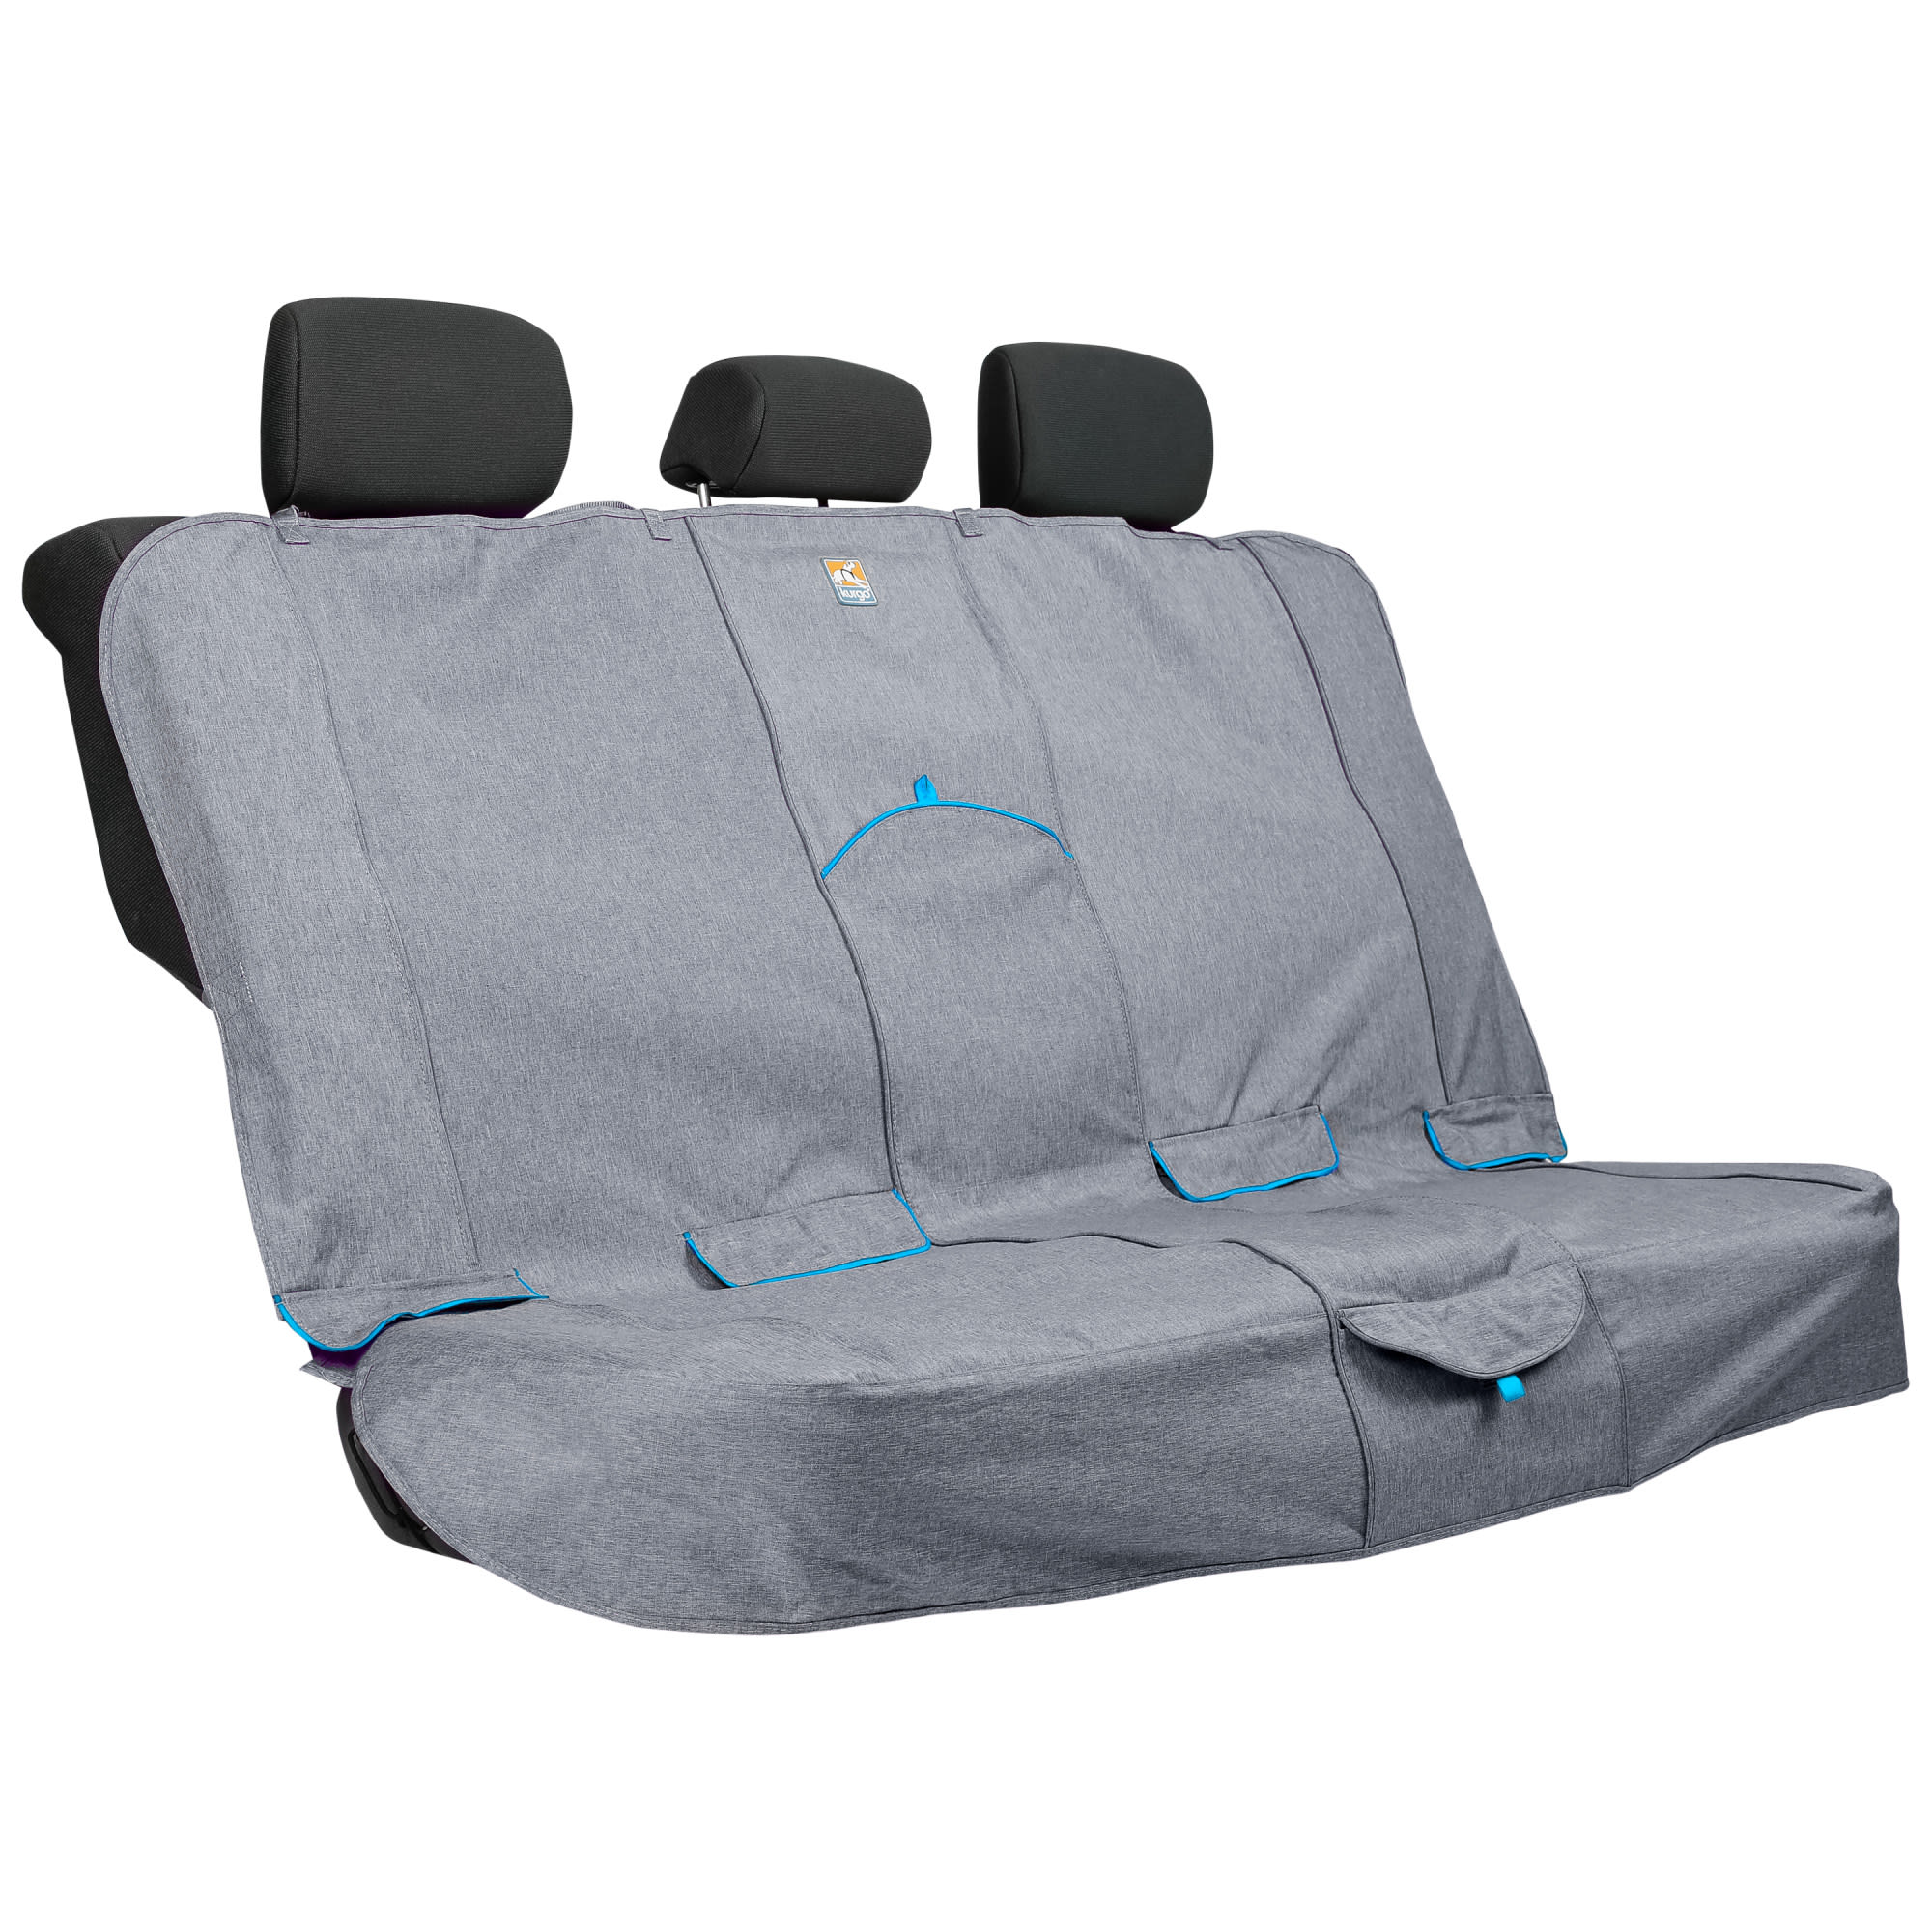 UNIVERSAL FIT GREY Car Seat Back Protector with 3 pockets 